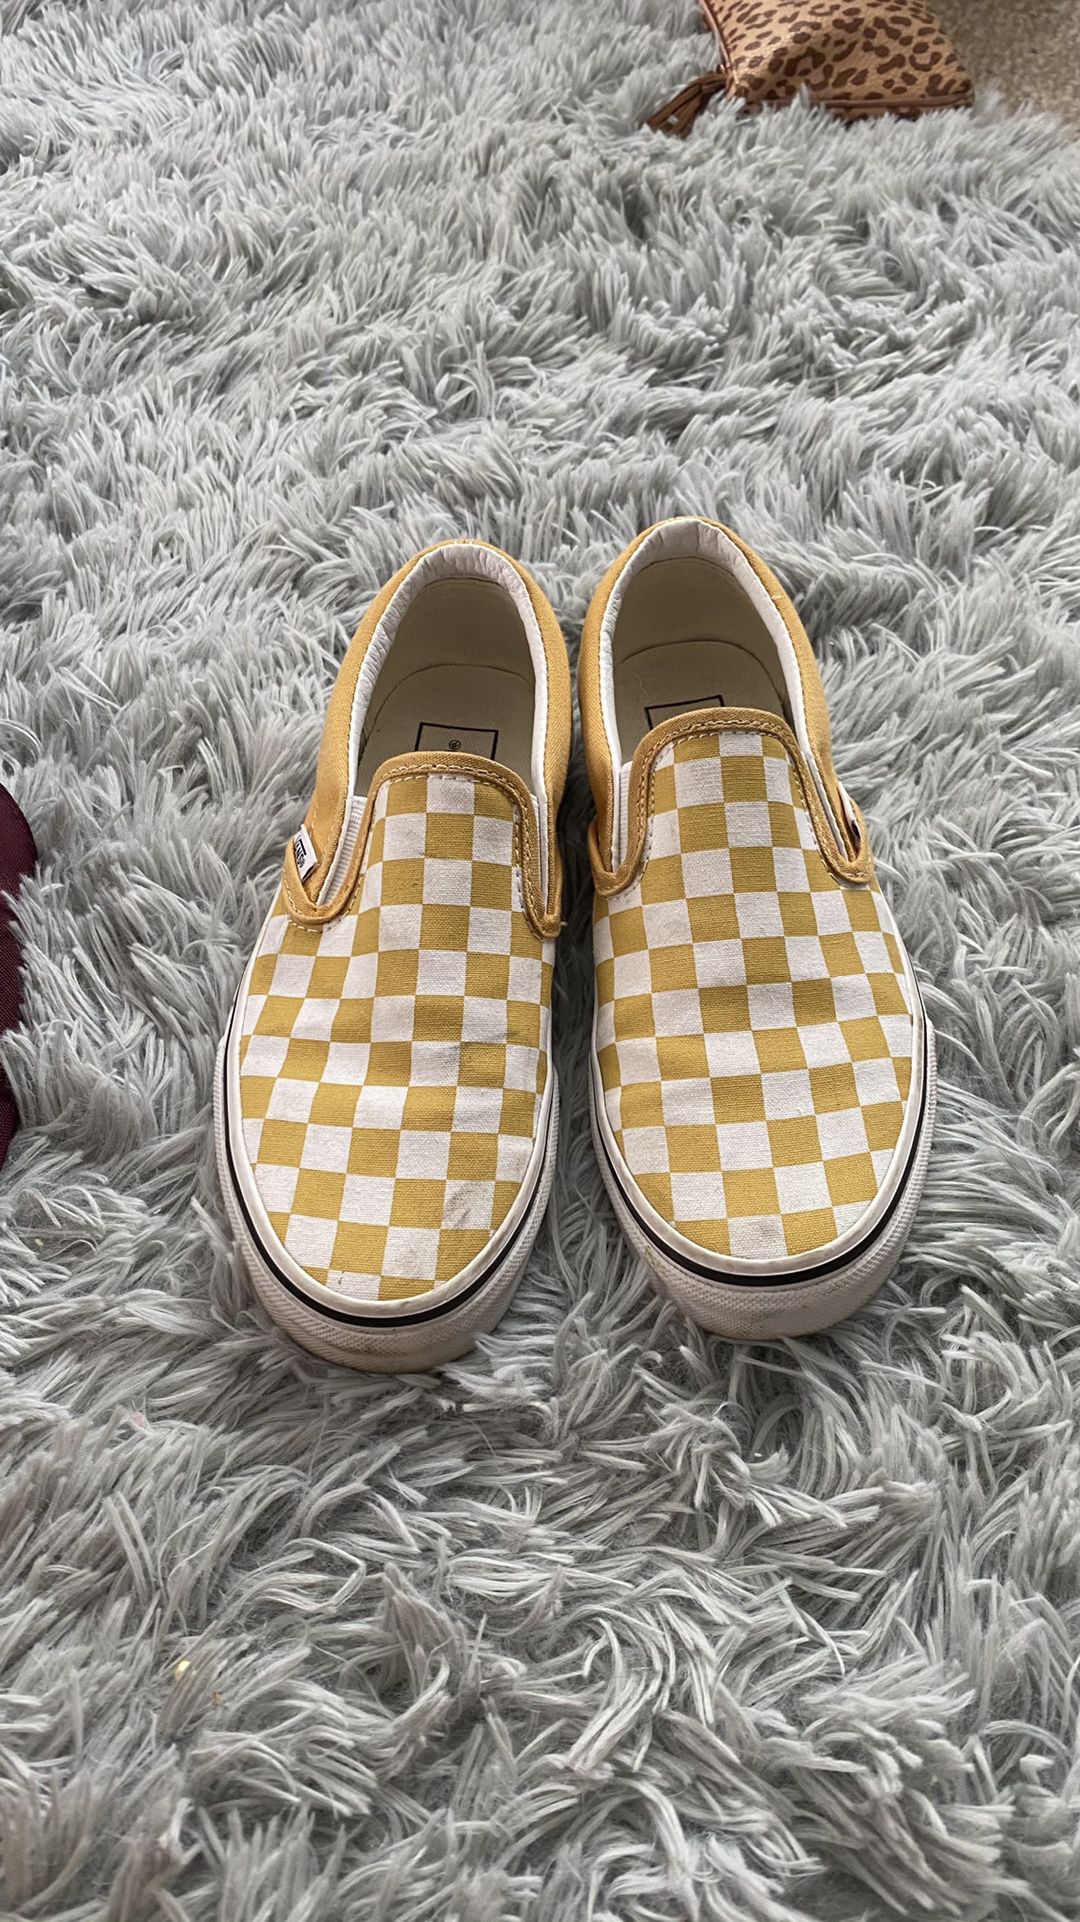 Gold and white checkered vans